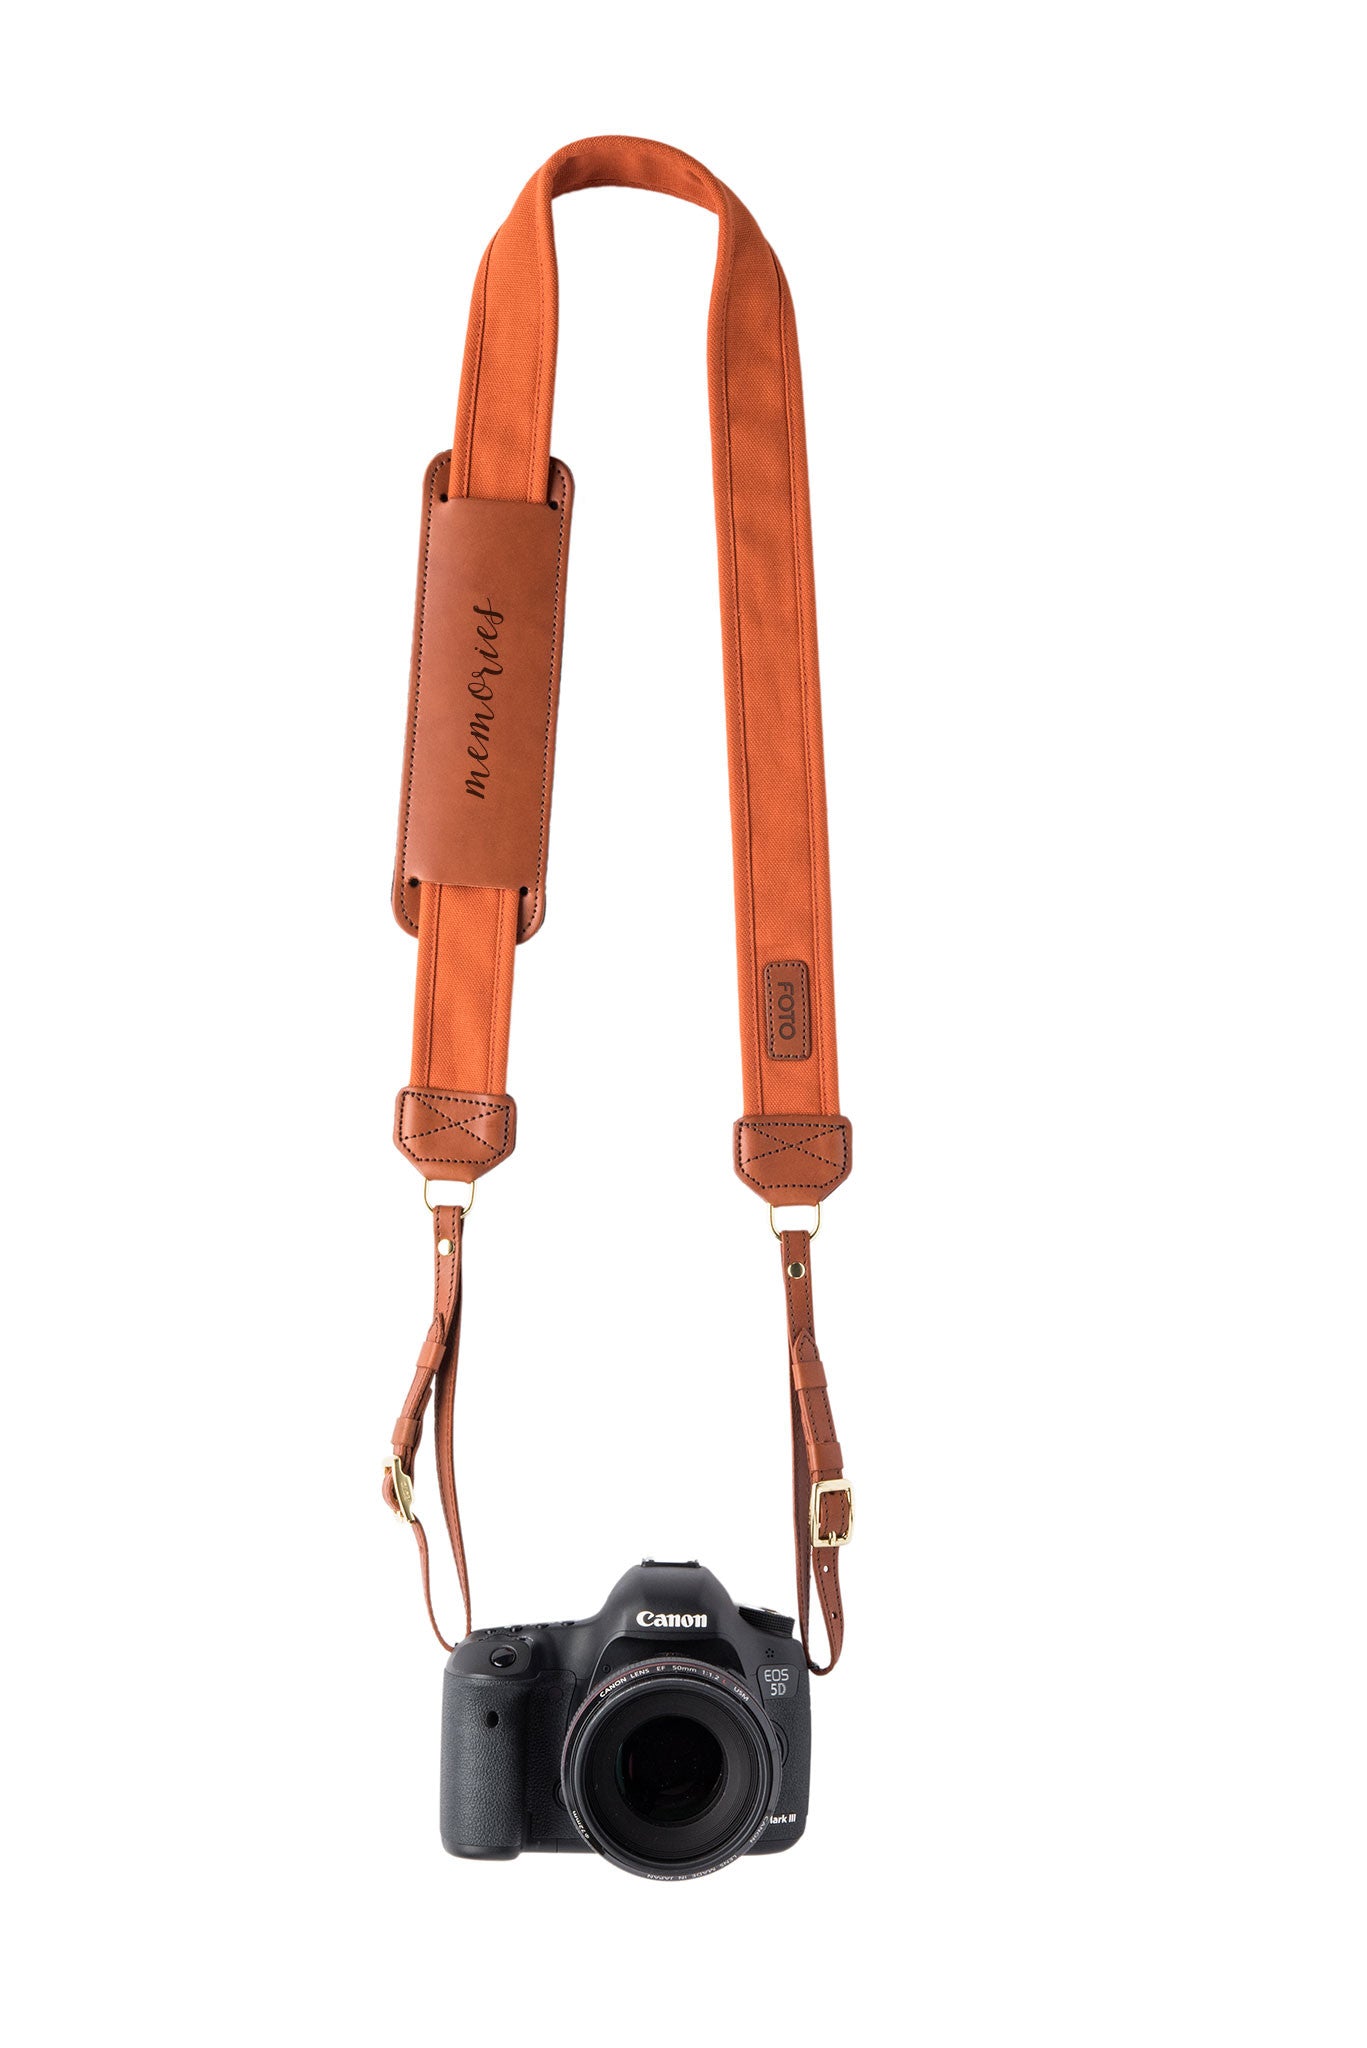 FOTO | Sweet Potato Fotostrap - a burnt orange canvas and genuine leather camera strap that can be personalized with a monogram or business logo, making it the perfect personalized gift! 